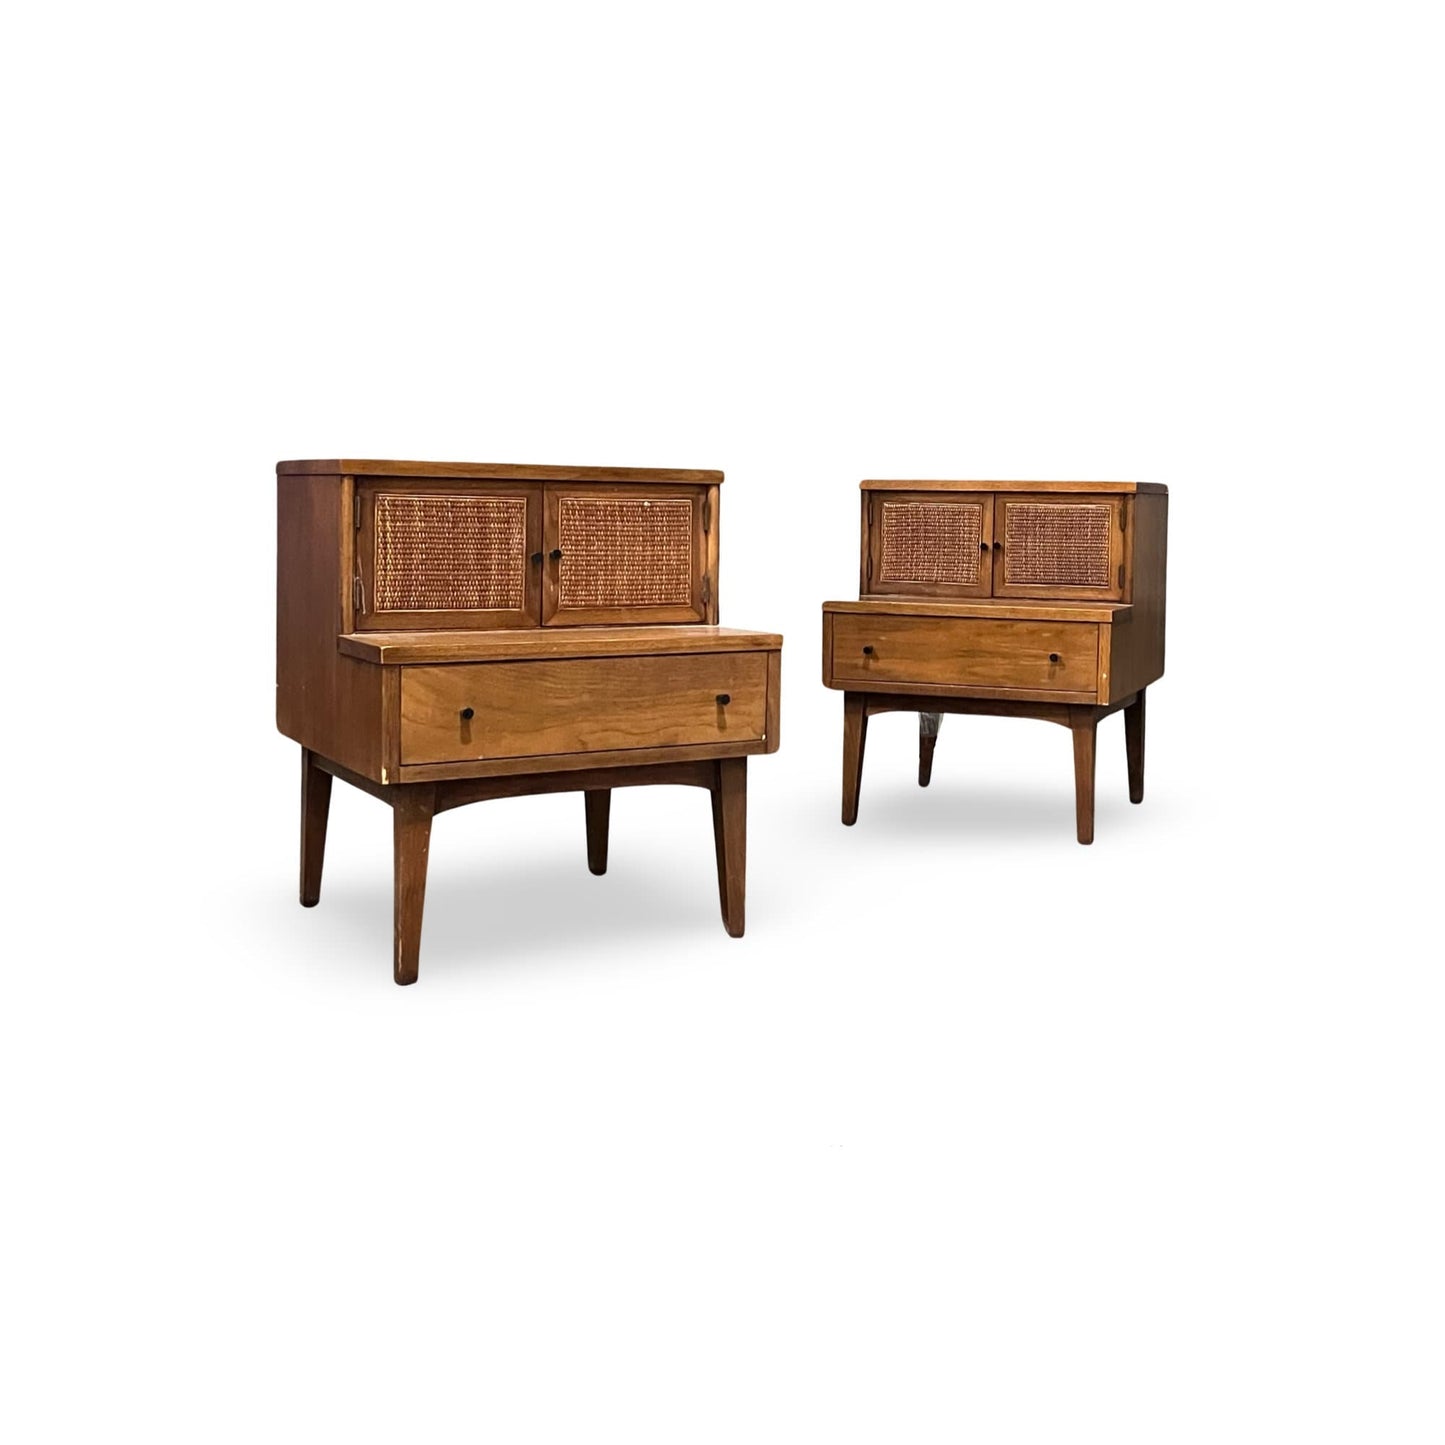 Pair of 1960s Mid-century Modern nightstands with two-tier step design.